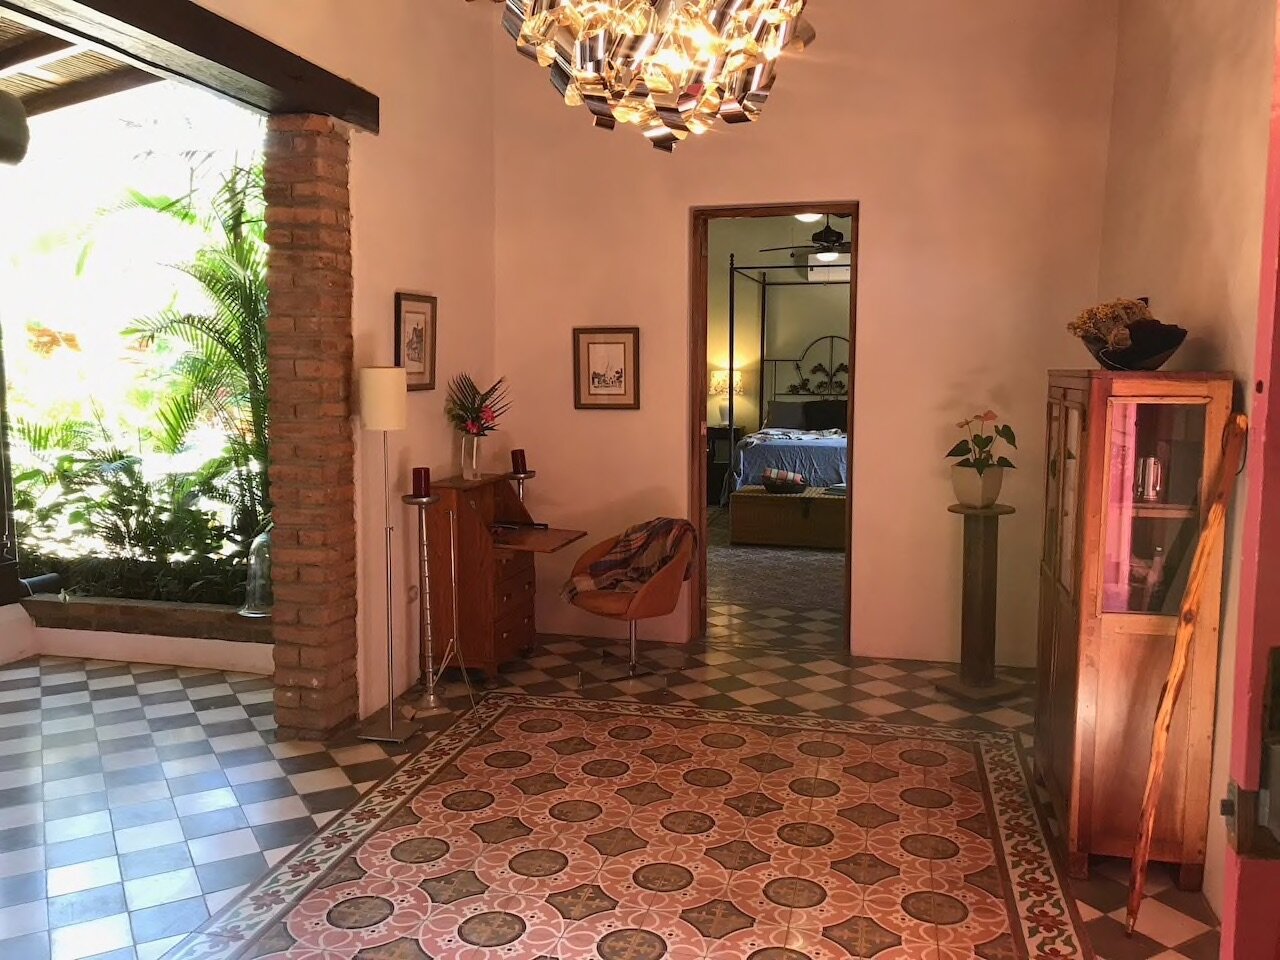 New Colonial Style Home For Sale Granada Nicaragua 25.jpeg